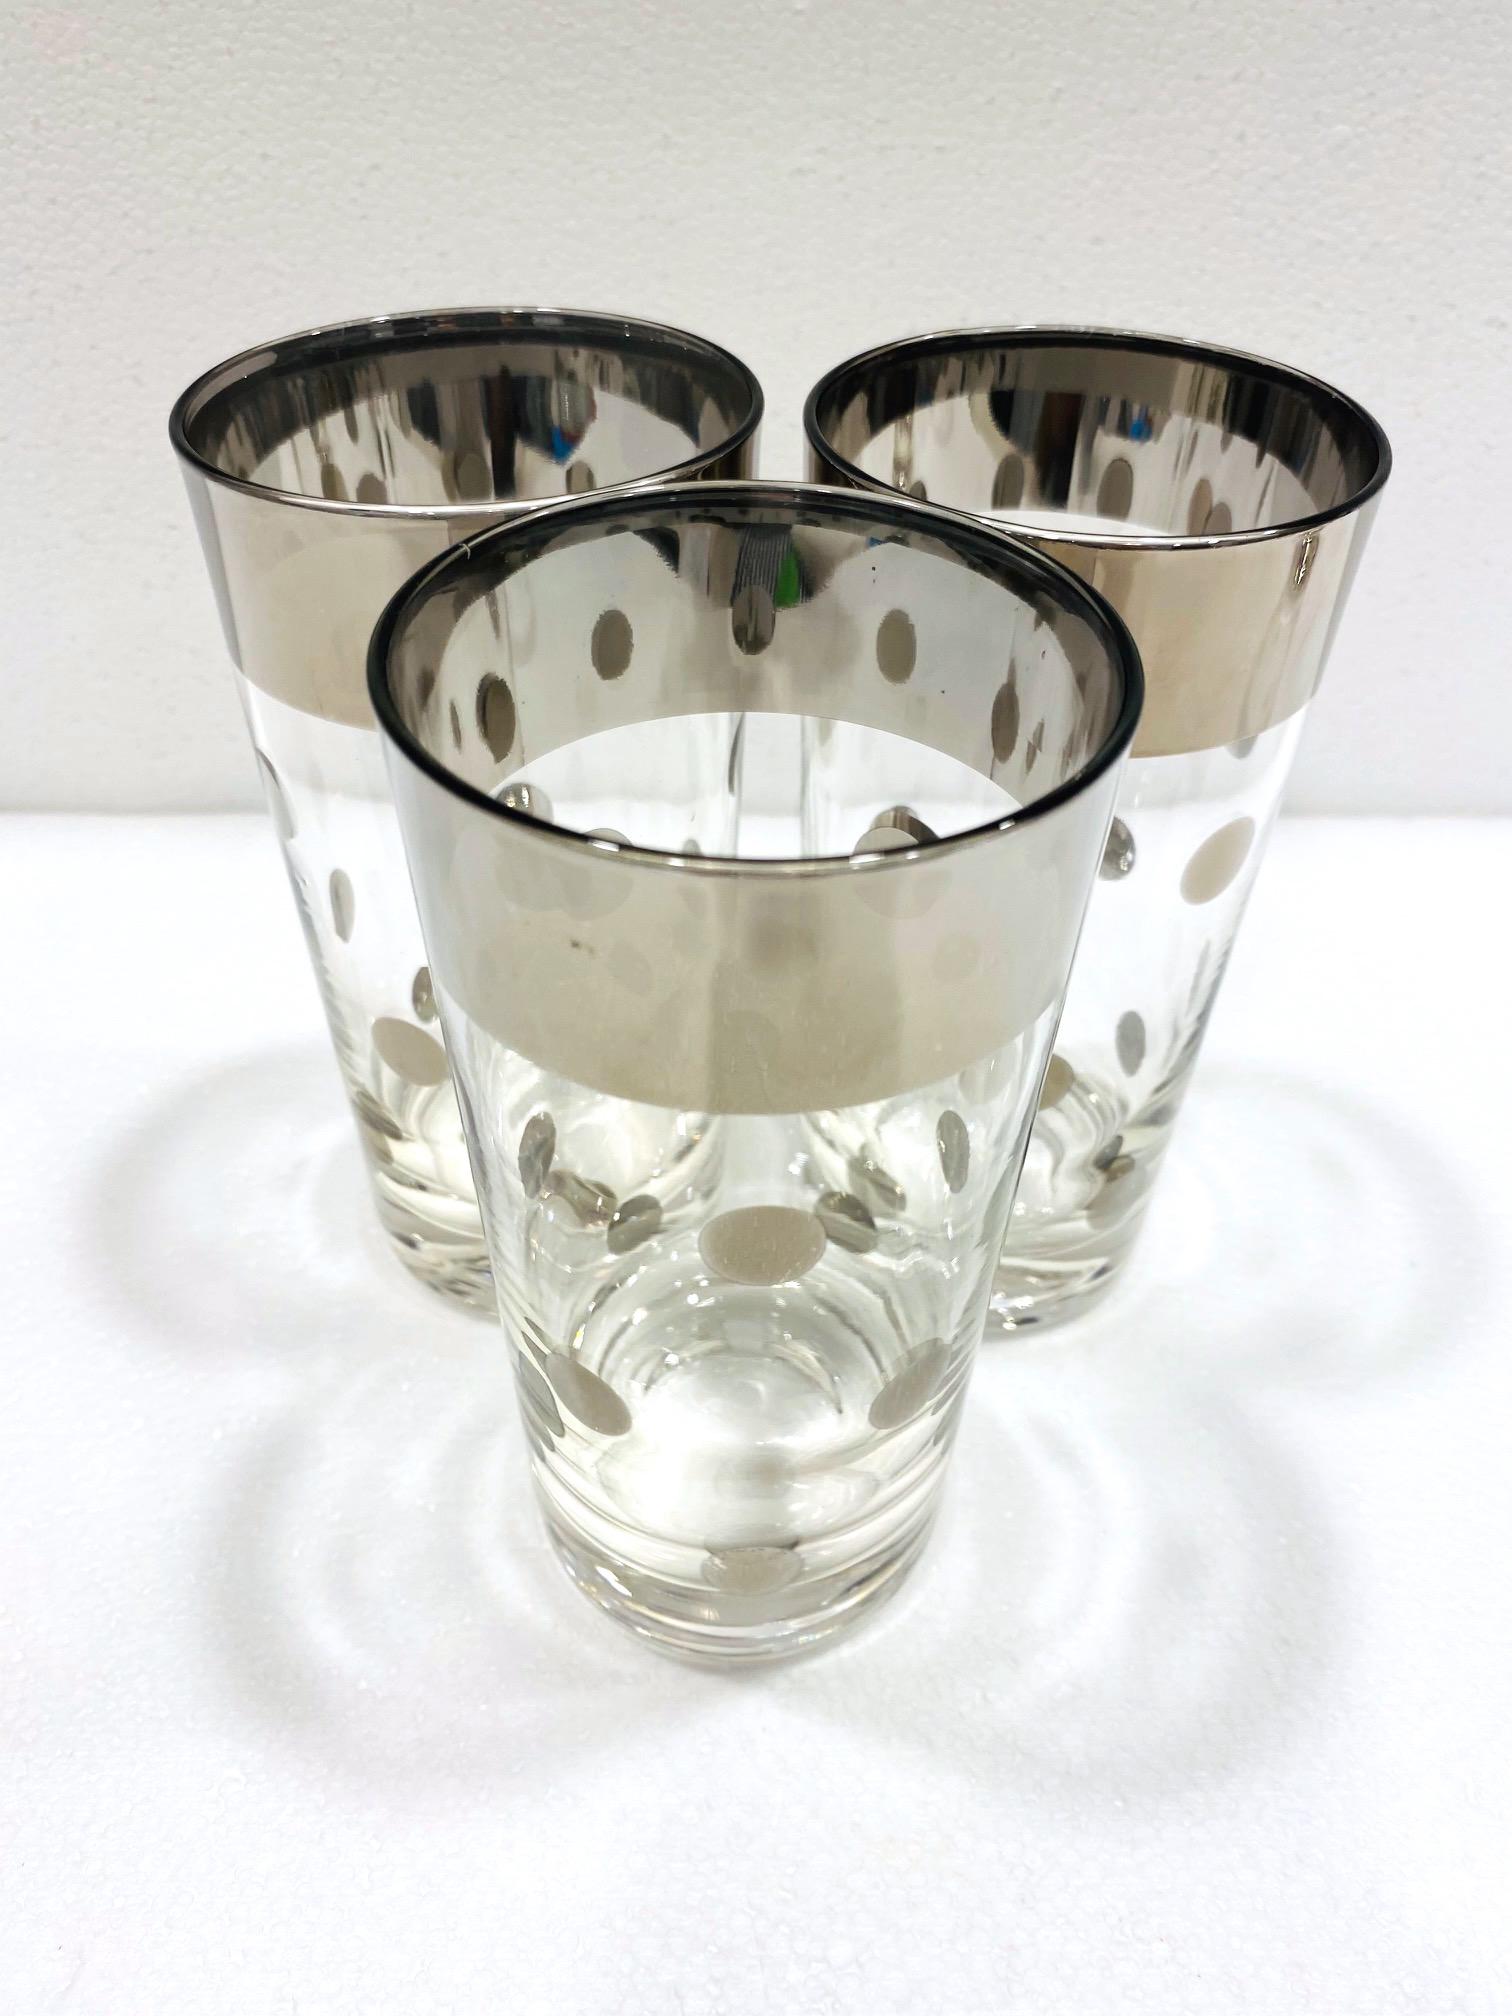 Hand-Crafted Set of Six Polka Dot Barware Glasses with Silver Overlay by Dorothy Thorpe, 1960